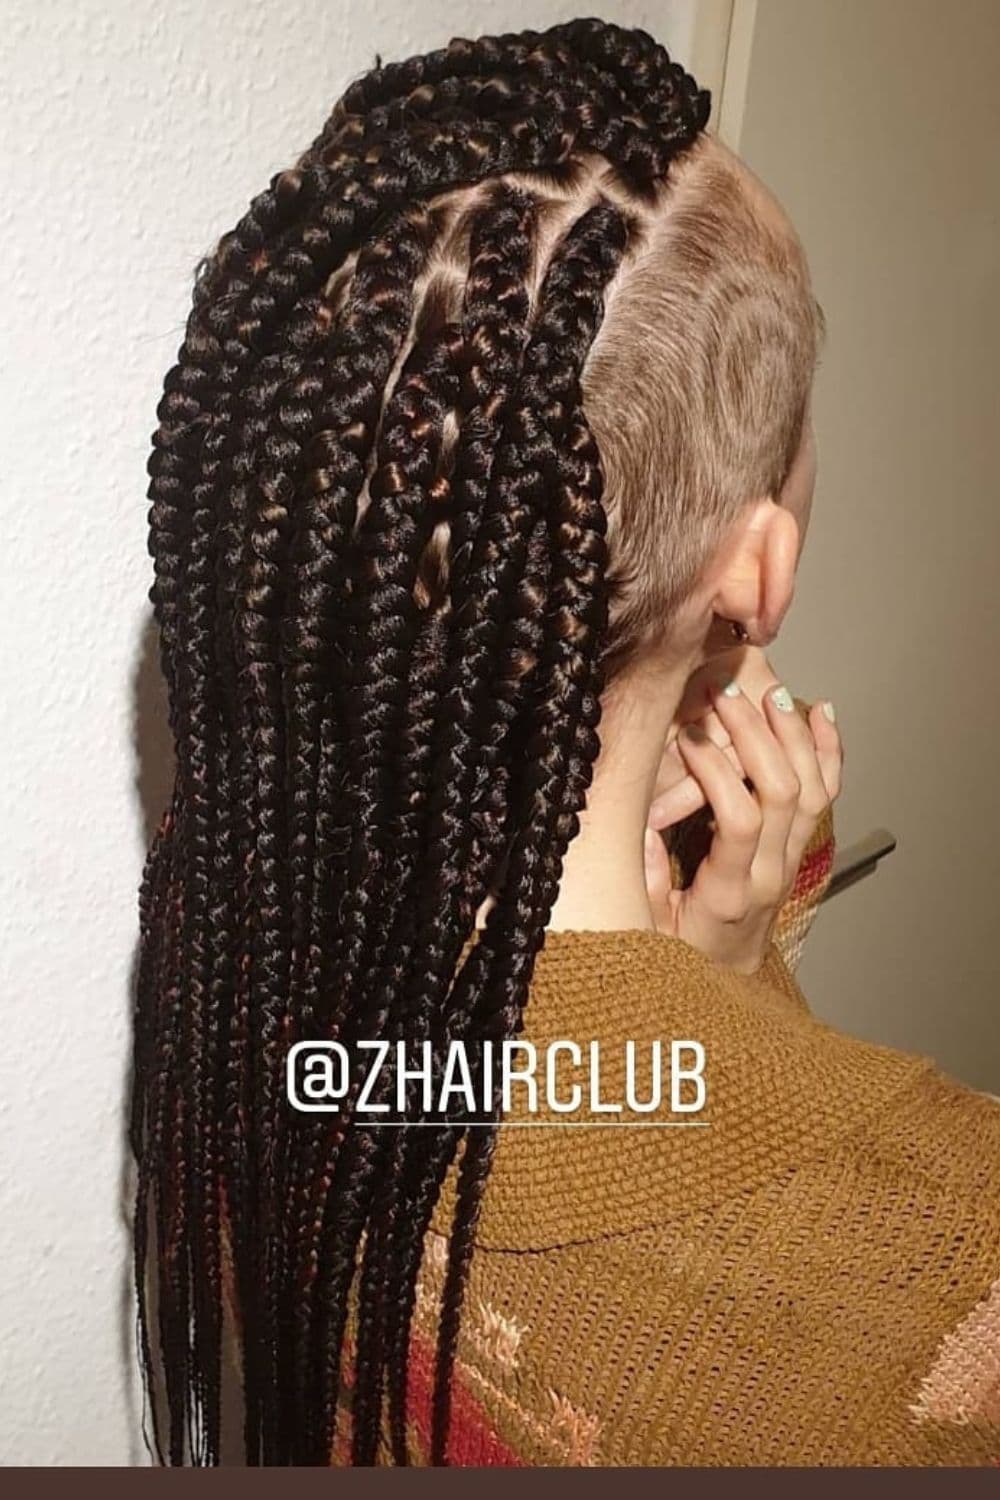 A woman with black knotless braids with a shaved side.